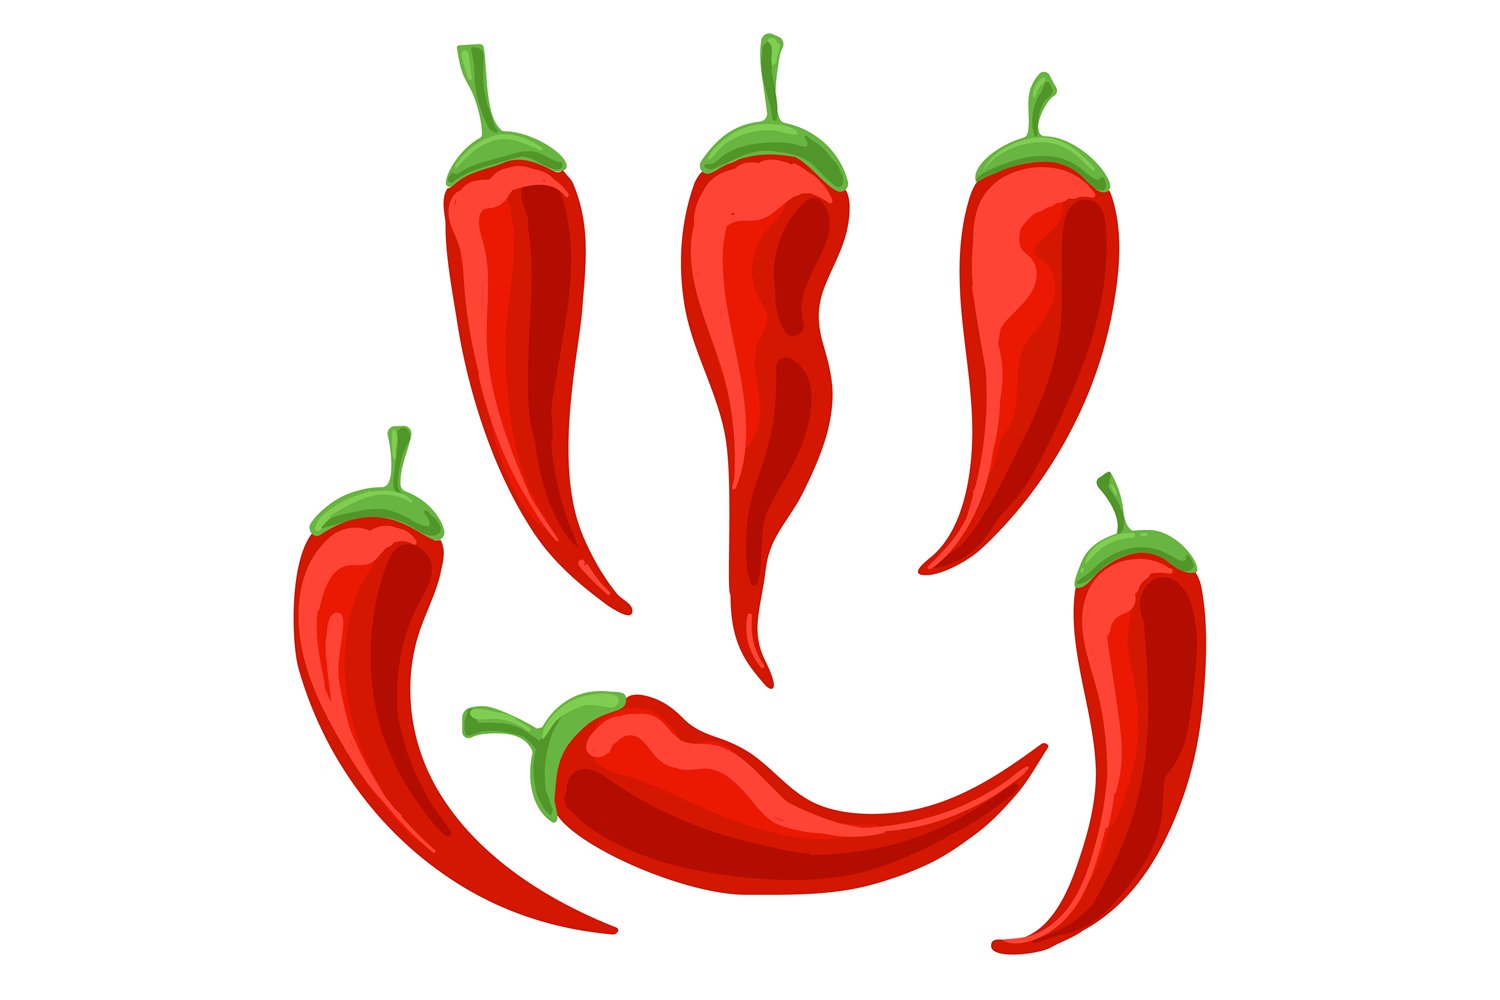 White background with so realistic red chili peppers.